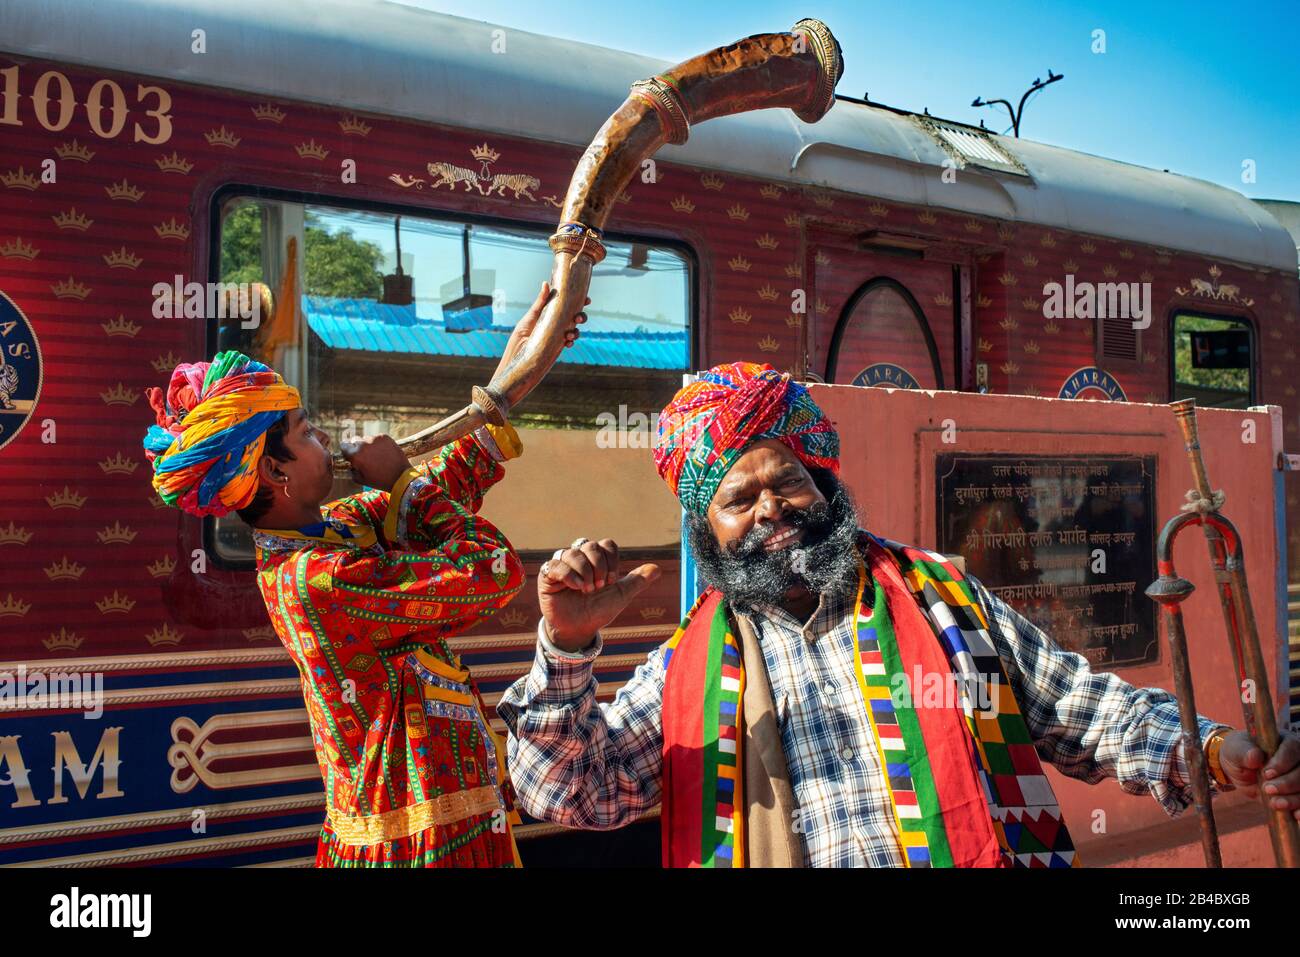 Jaipur folk music and dances wellcome to Luxury train Maharajas express train in Jaipur Junction Railway Station Rajasthan India. Stock Photo